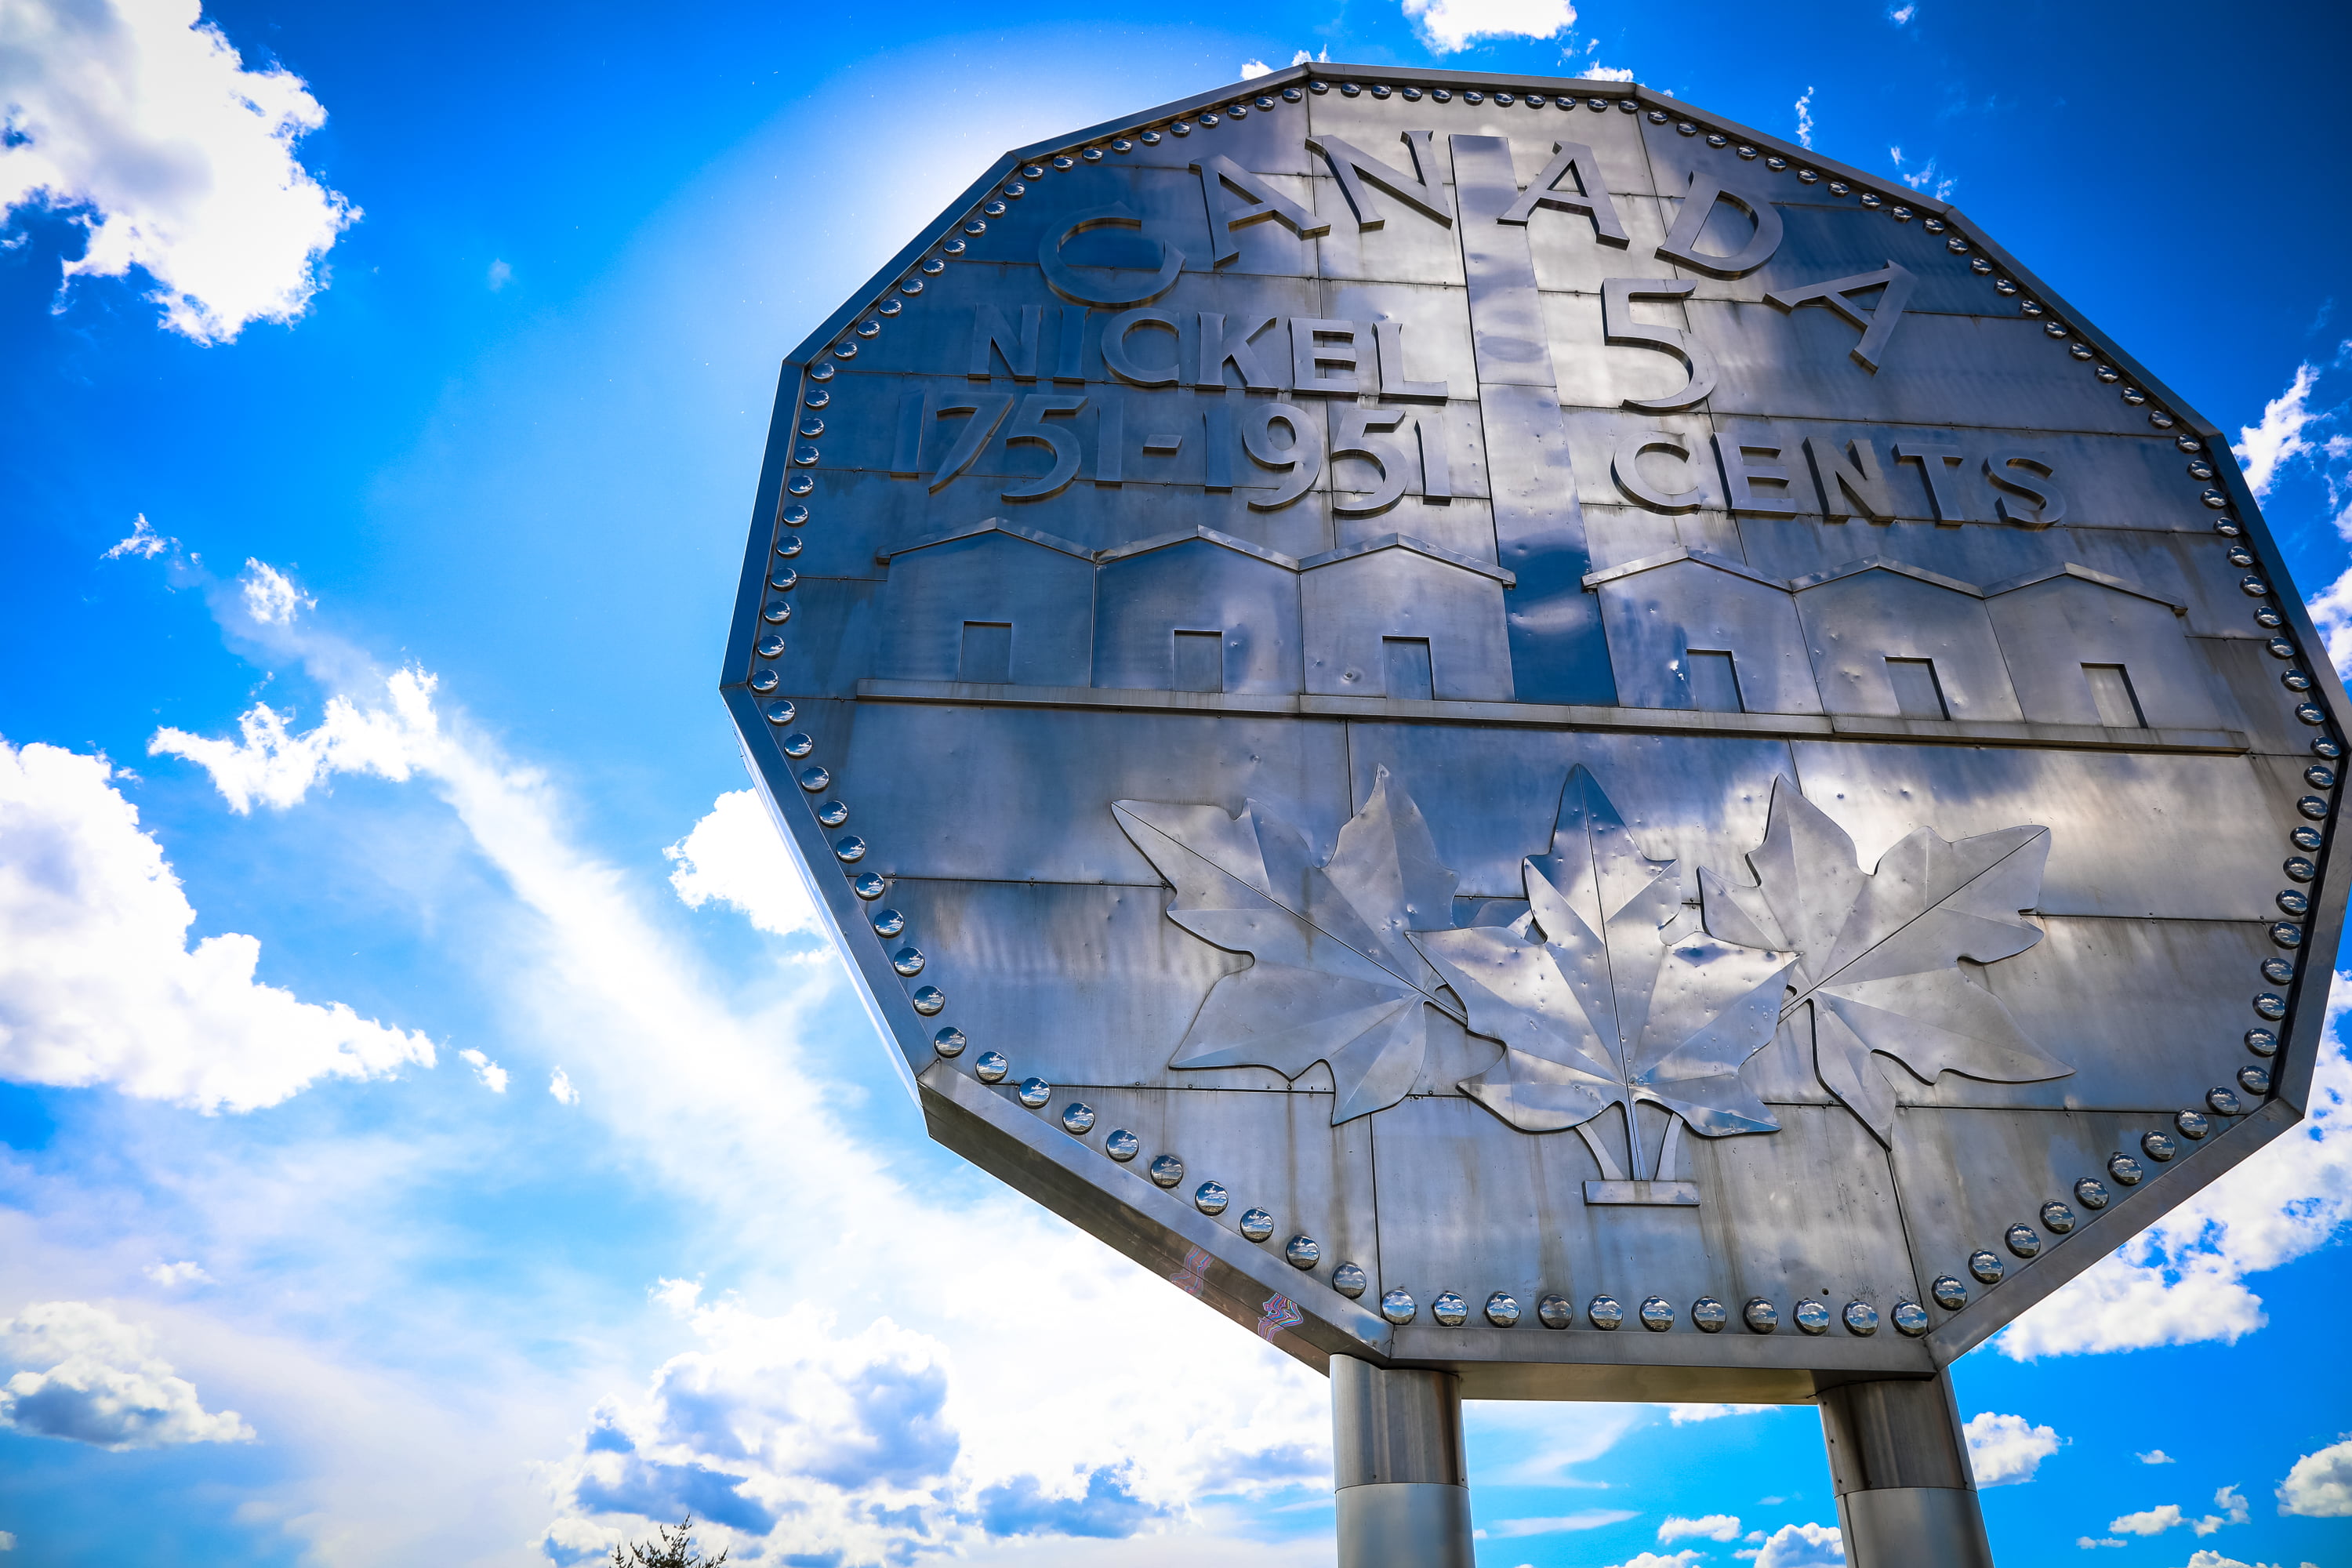 a low shot of Sudbury's Big Nickel monument, standing tall above the camera in front of a brilliant blue sky striped with white clouds.